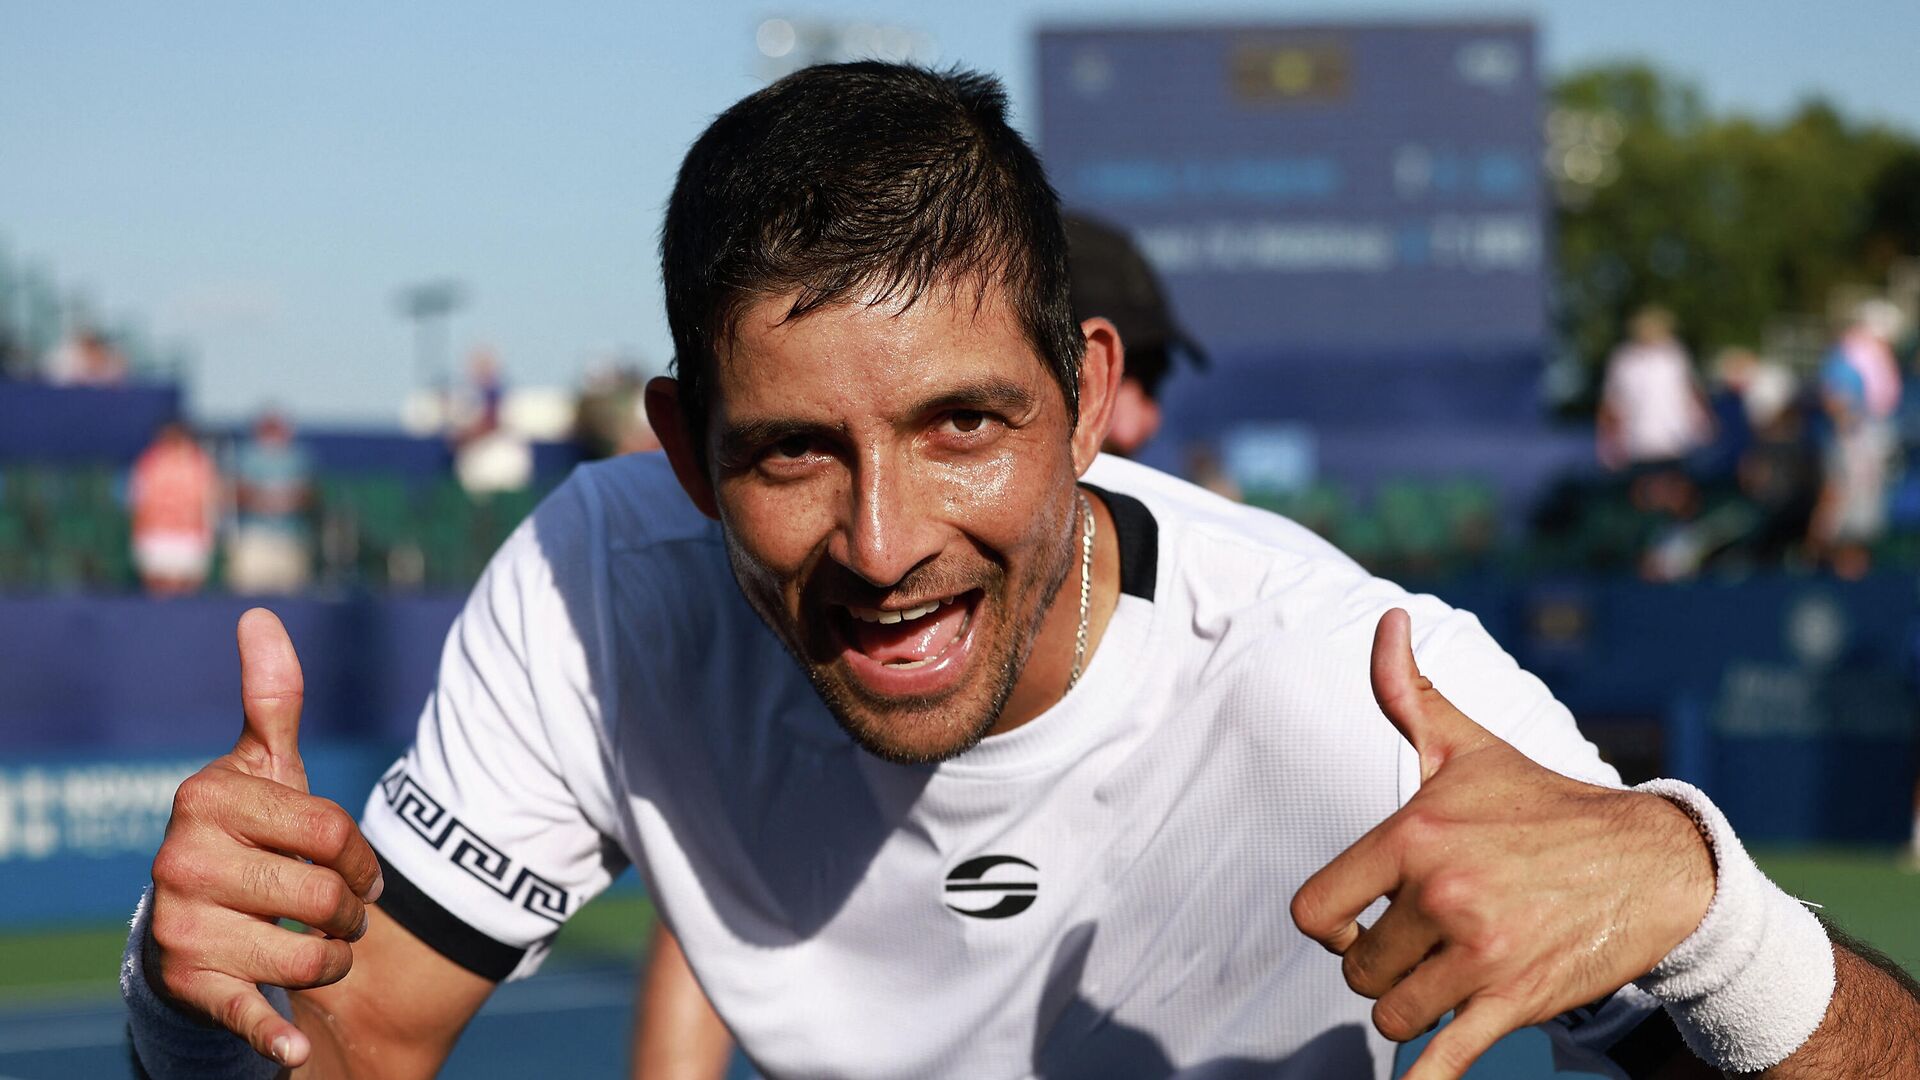 WINSTON SALEM, NORTH CAROLINA - AUGUST 27: Marcelo Arevalo of El Salvador celebrates after partnering with Matwe Middelkoop of Netherlands to defeat Ivan Dodig of Croatia and Austin Krajicek in the doubles final of the Winston-Salem Open at Wake Forest Tennis Complex on August 27, 2021 in Winston Salem, North Carolina.   Grant Halverson/Getty Images/AFP (Photo by GRANT HALVERSON / GETTY IMAGES NORTH AMERICA / Getty Images via AFP) - РИА Новости, 1920, 08.09.2021